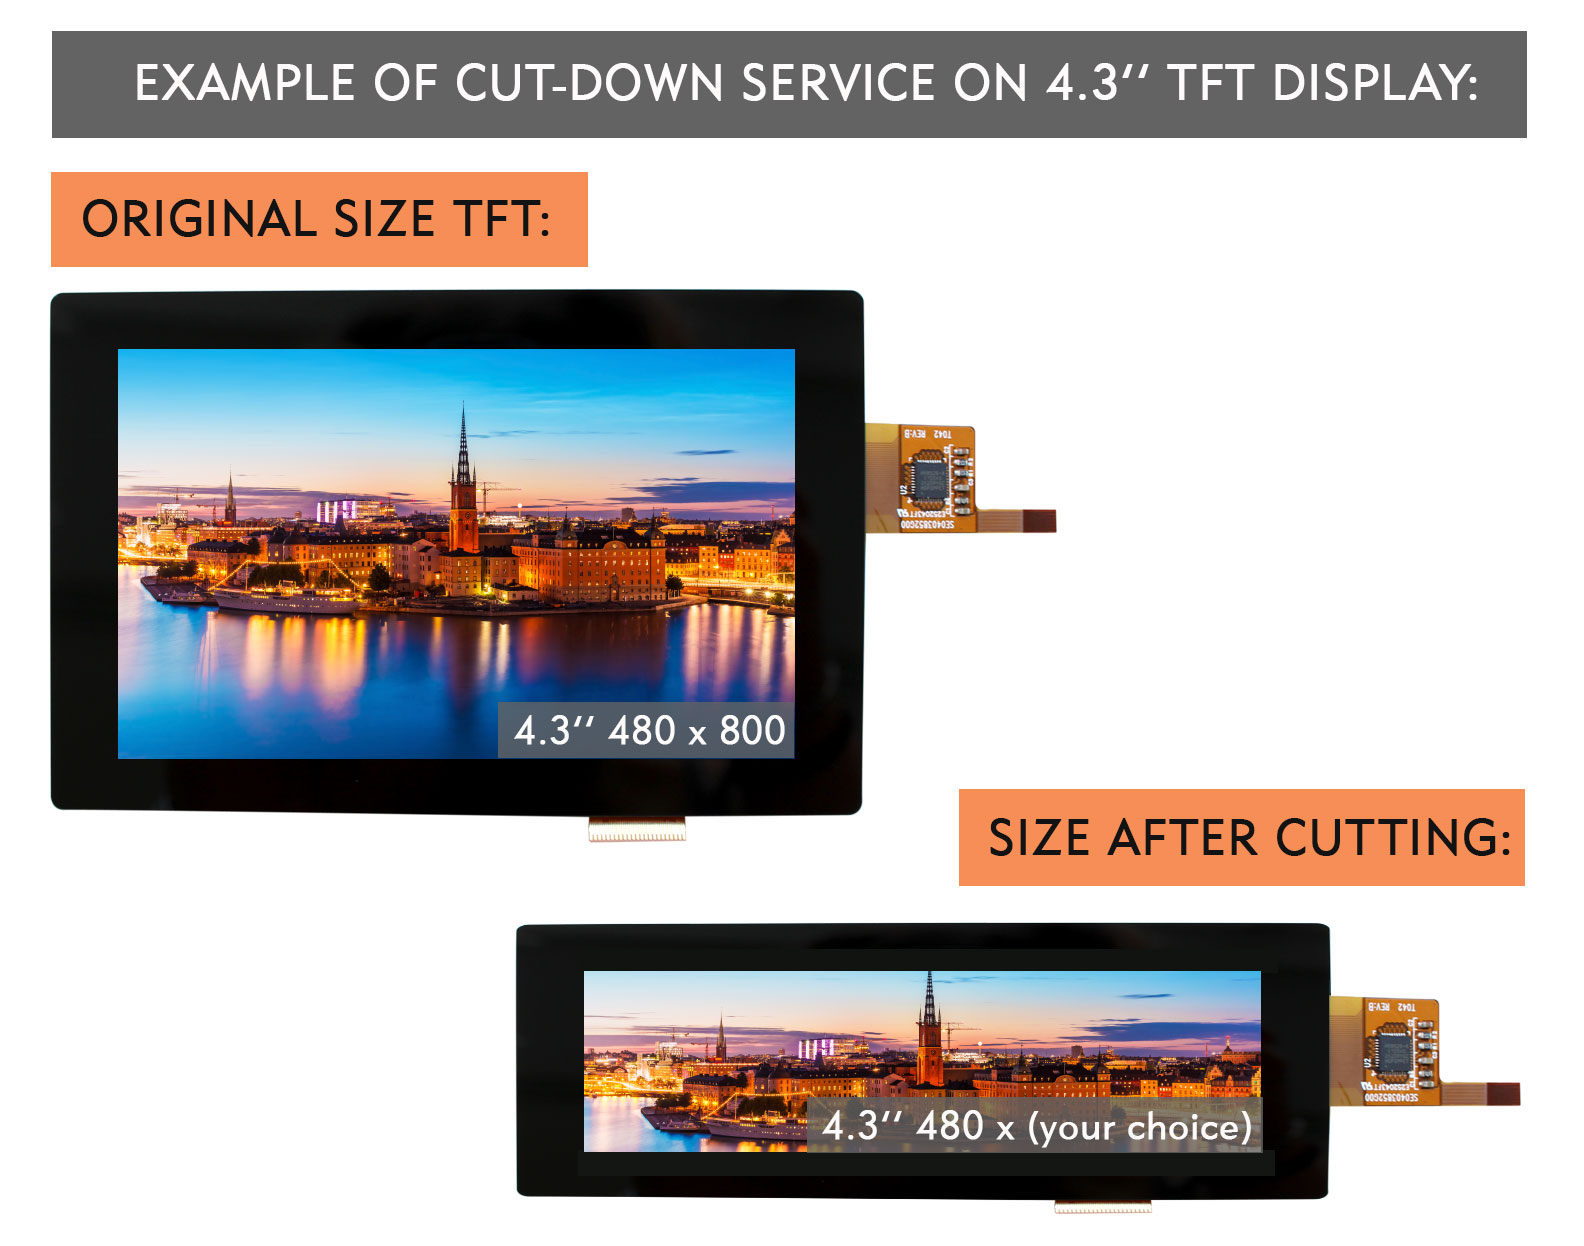 Diagram example of cut-down service on a 4.3inch TFT display comparing 480 x 800 resolution to 480 x (your choice) after cutting.